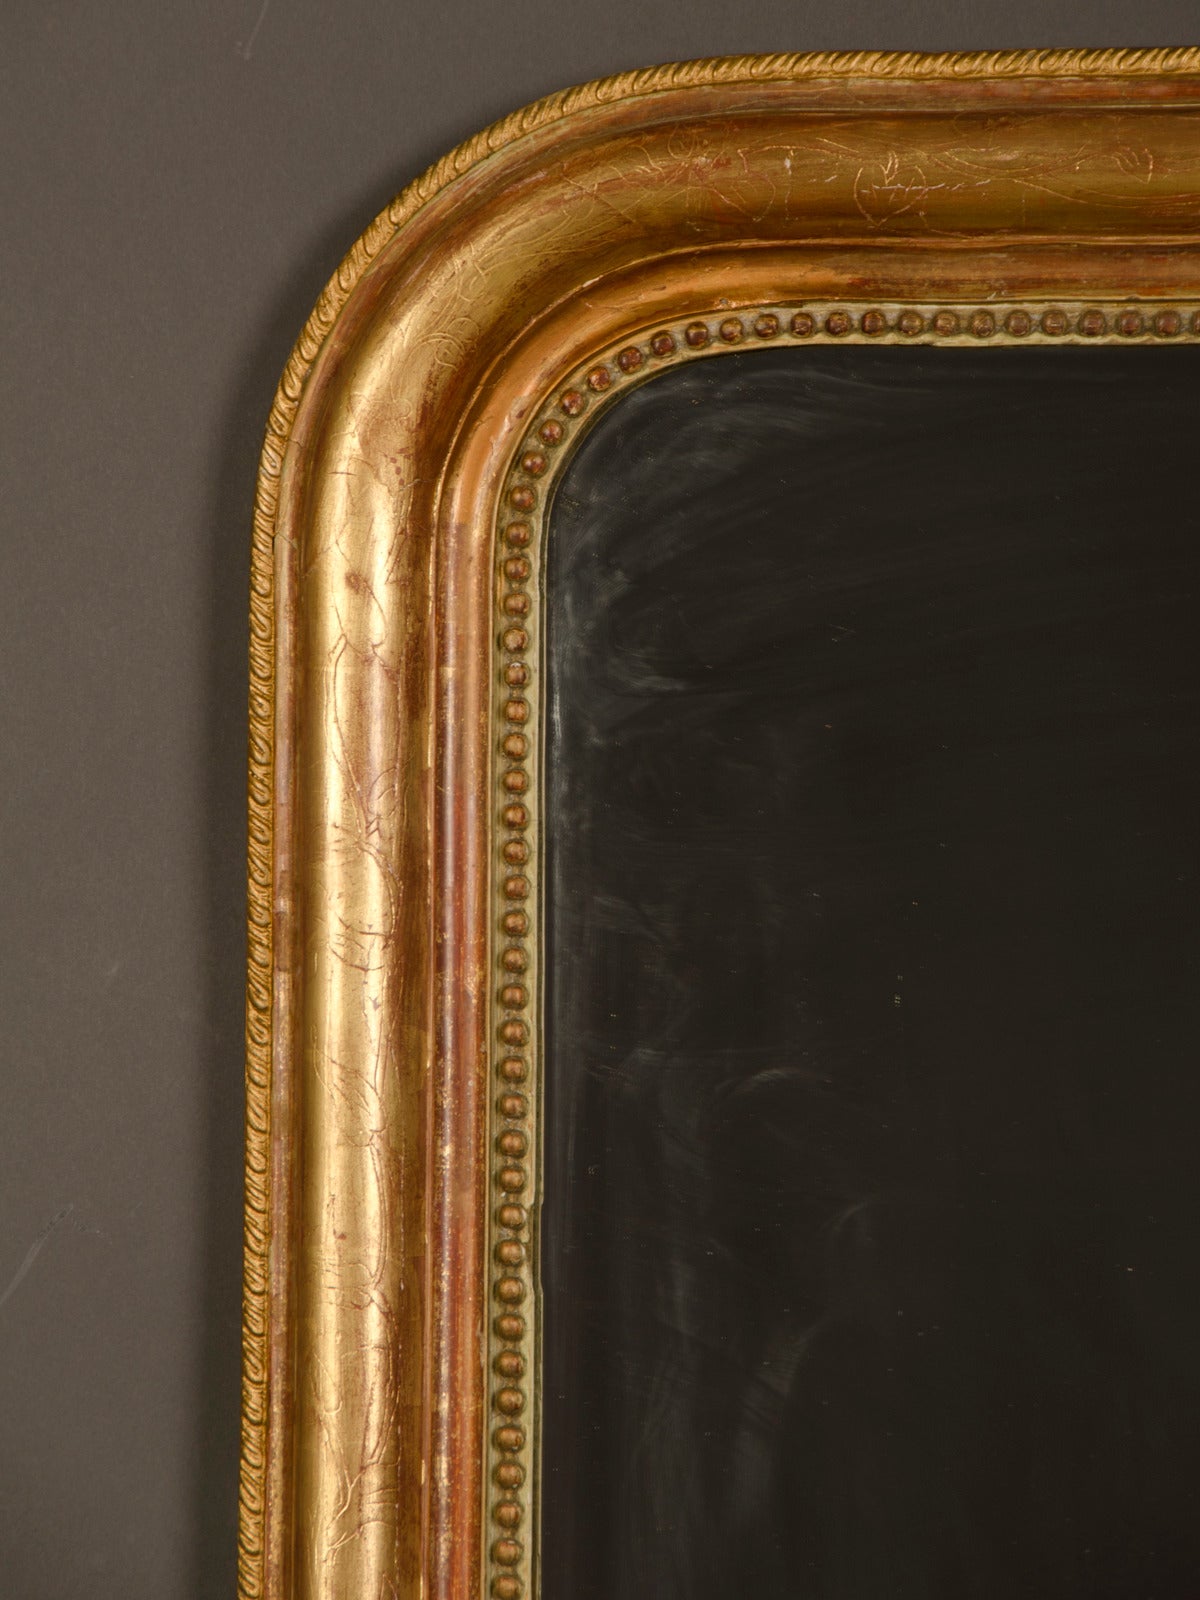 A Louis Philippe style gold leaf frame that encloses the original mirror glass from the Belle Epoque period in France circa 1890. This is a perfect example of the type of mirror and frame so popular in late nineteenth century France. The simplicity